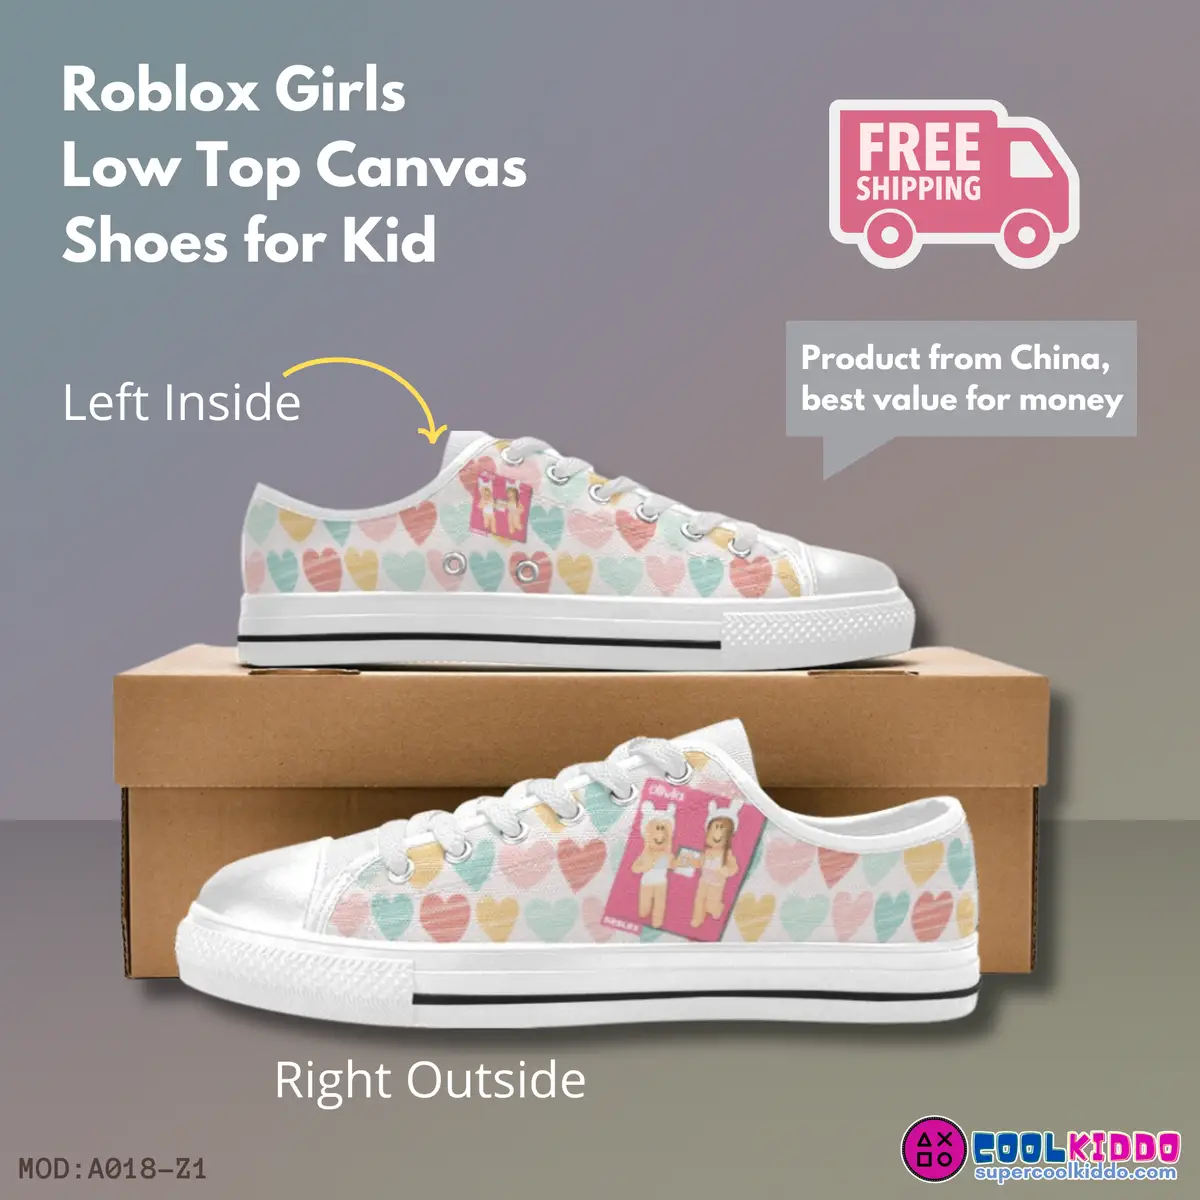 Roblox Girls Heartbeat, Low-Top Sneakers, Roblox Print Shoes Cool Kiddo 10